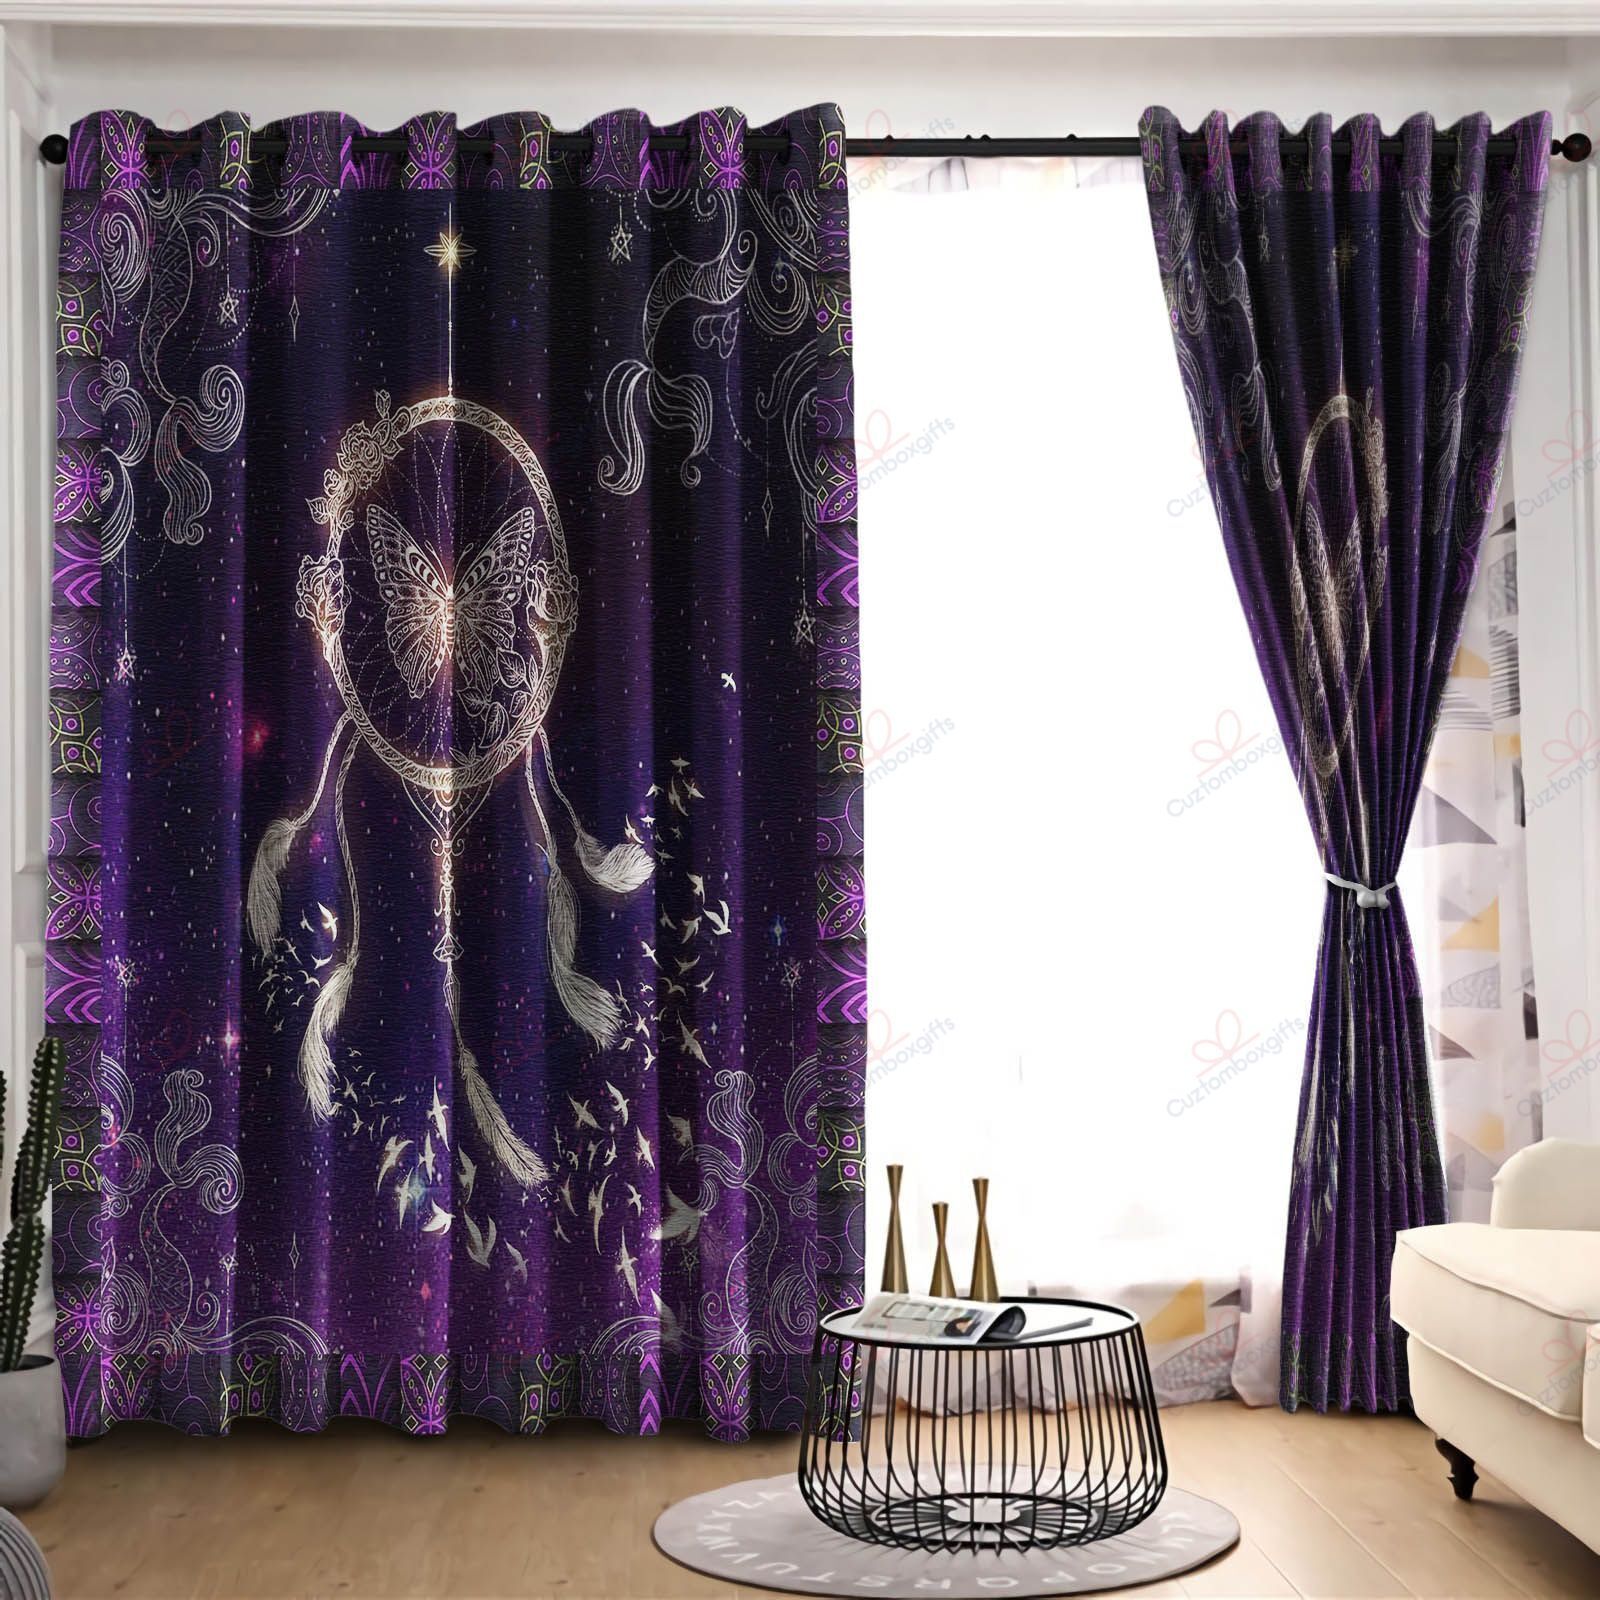 Dreamcatcher Butterfly Galaxy Printed Window Curtain Home Decor